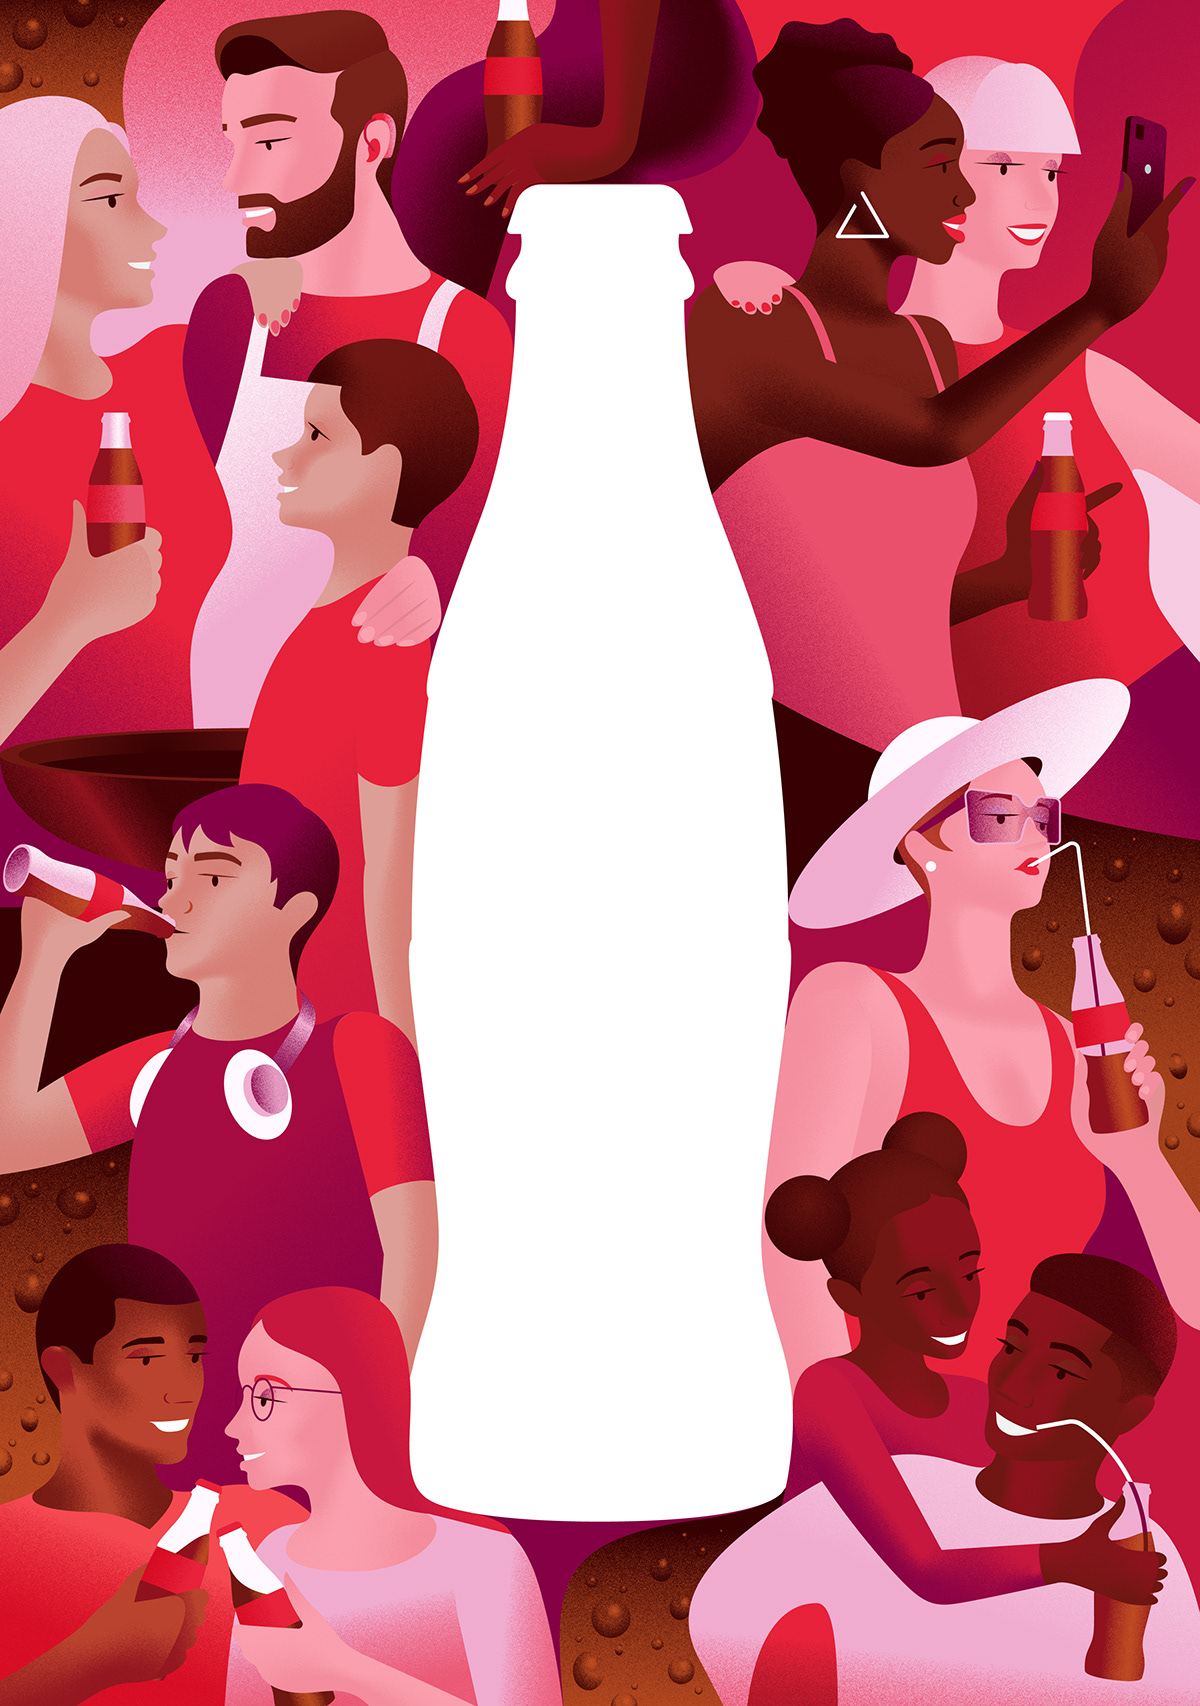 A beautifully crafted illustration of people, reveals a bottle silhouette.